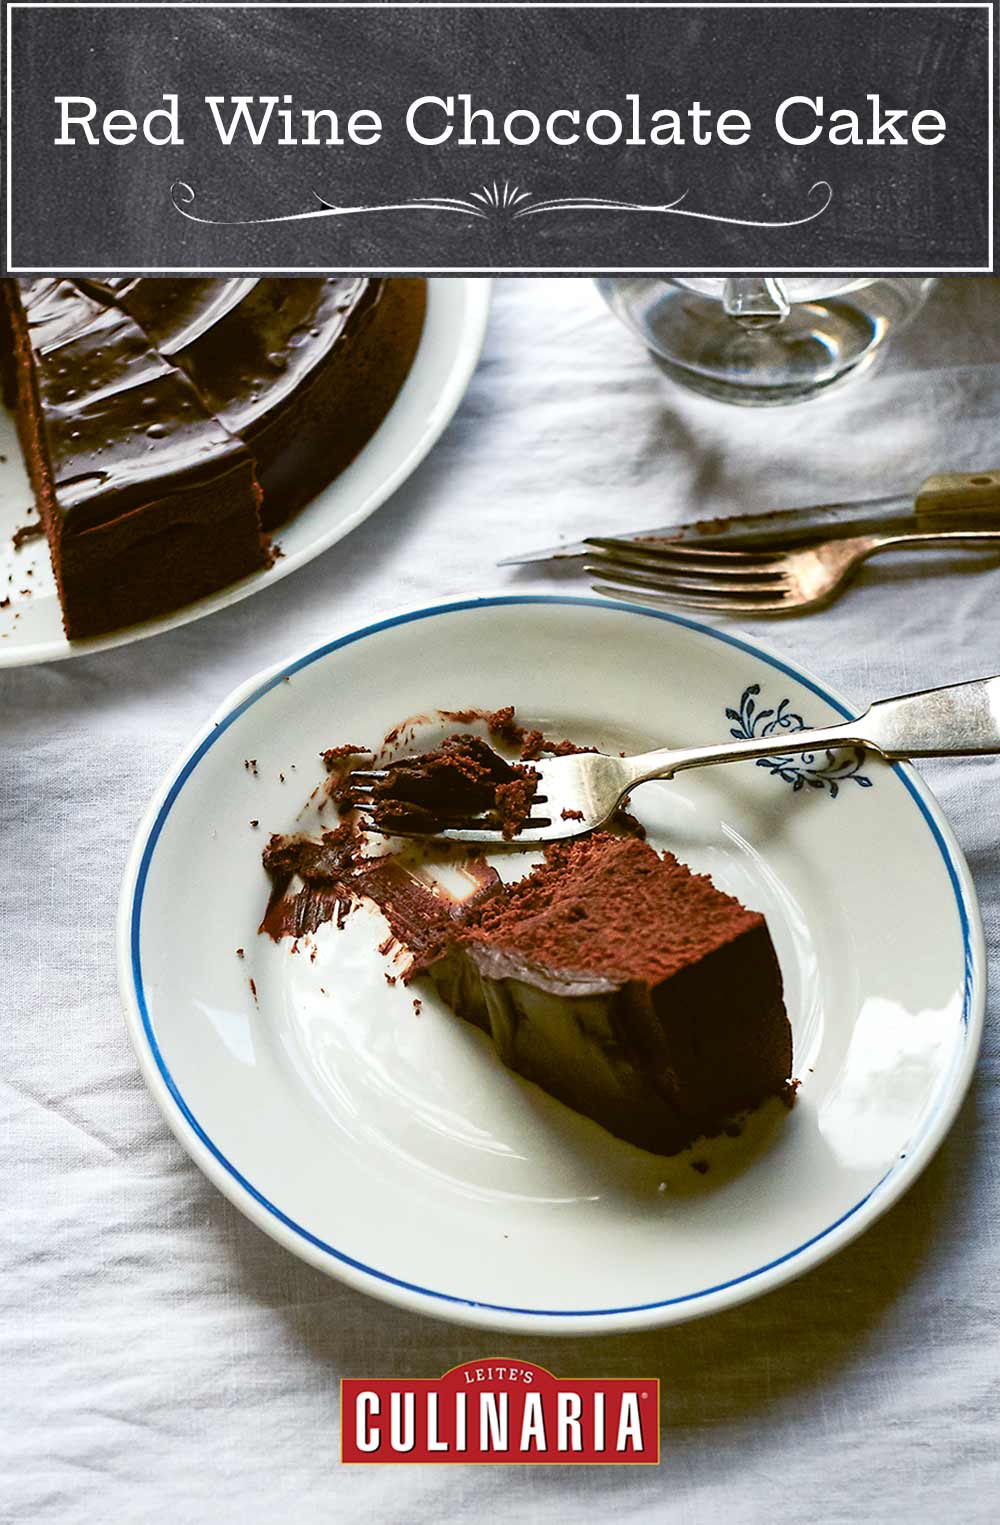 A partial slice of red wine chocolate cake on a plate with a fork resting beside the cake.